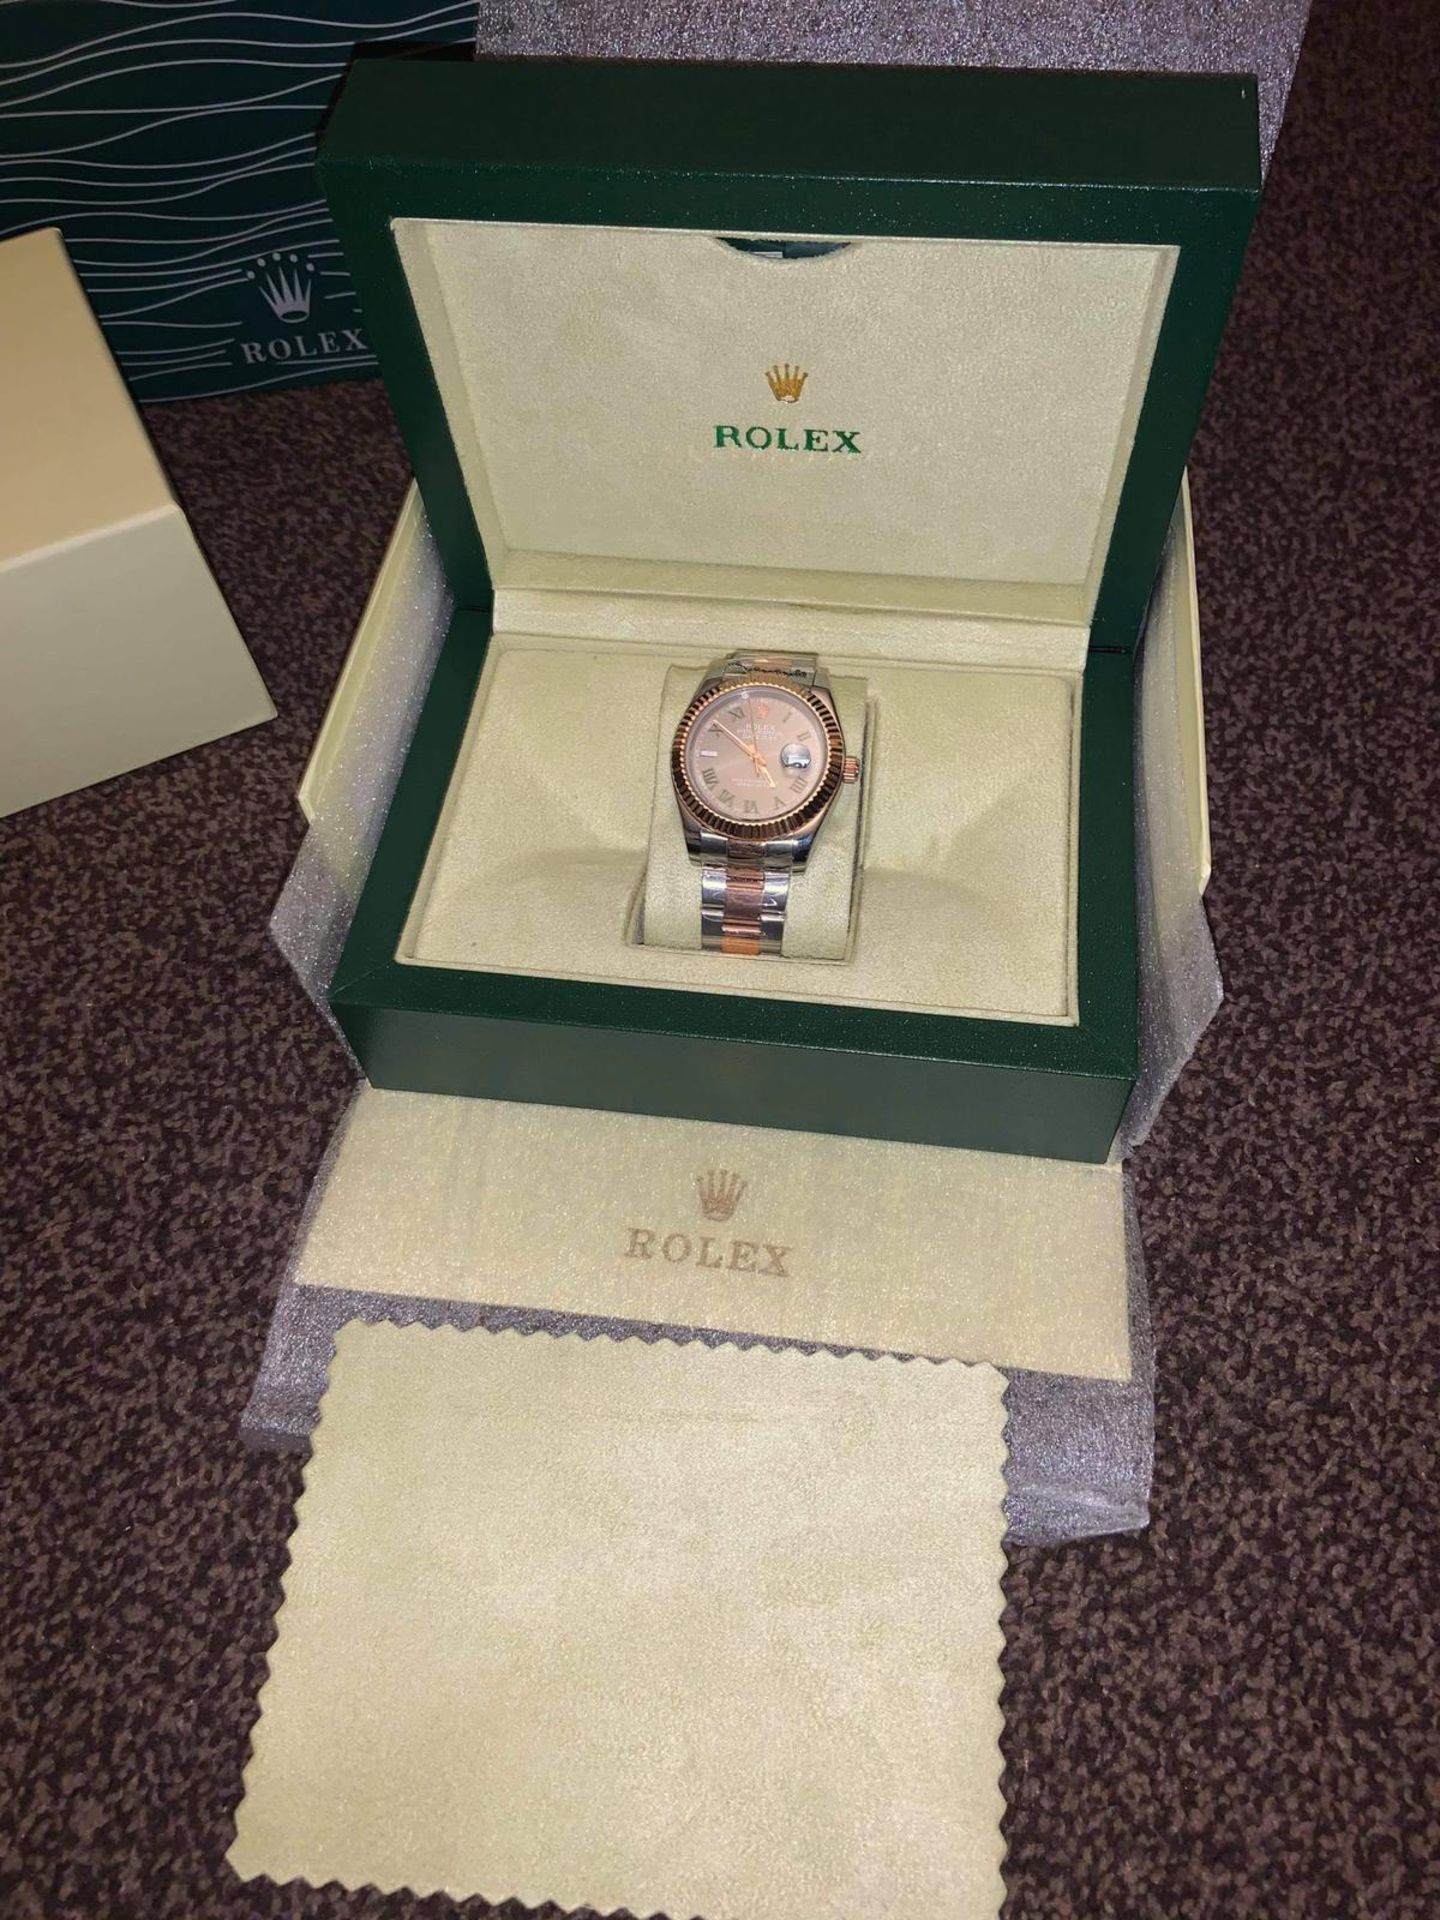 REPLICA ROLEX OYSTER PERPETUAL DATEJUST, BRAND NEW BOXED AND UNWORN *NO VAT* - Image 6 of 8